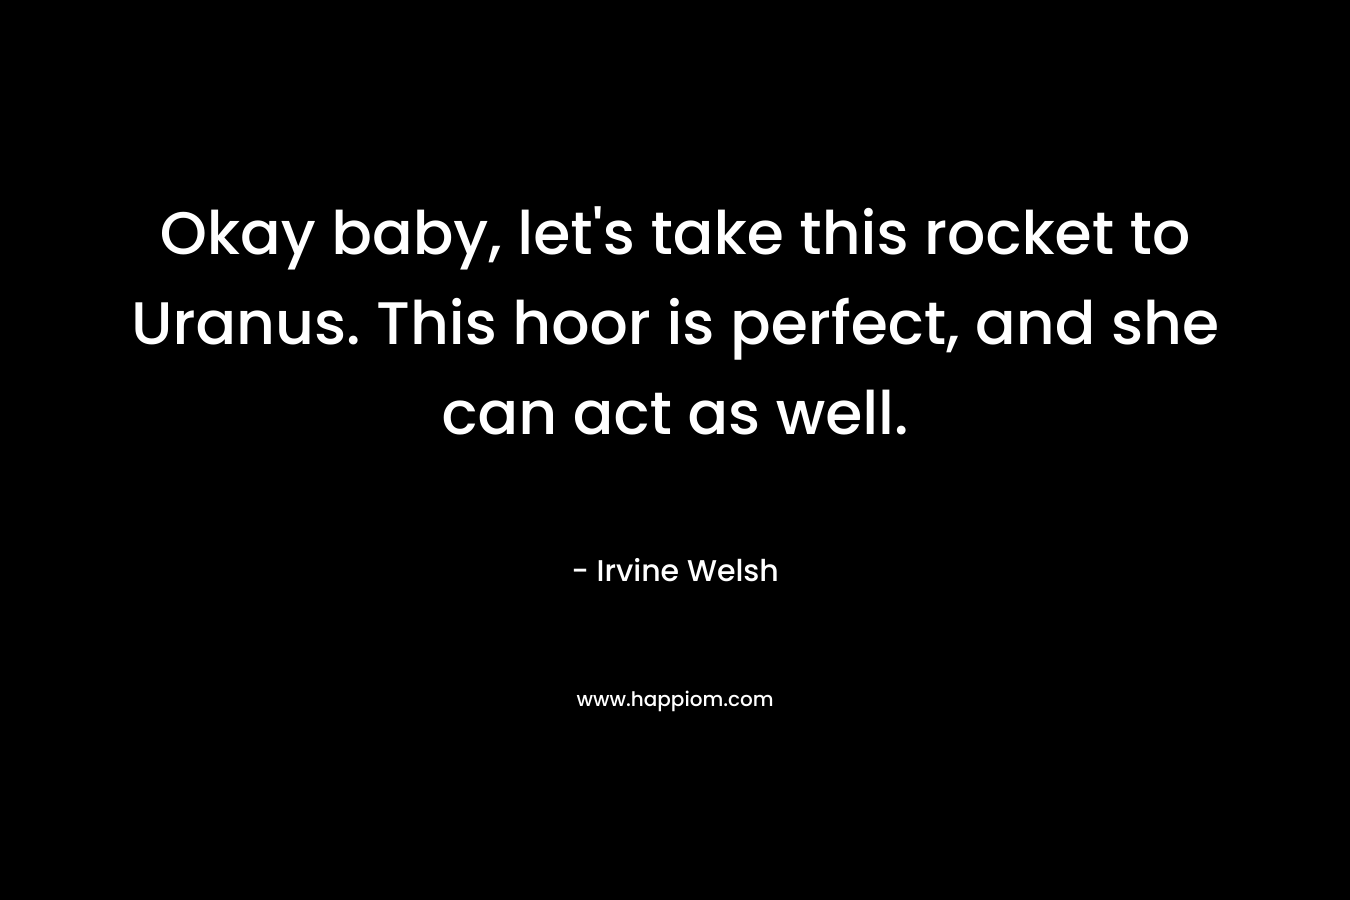 Okay baby, let’s take this rocket to Uranus. This hoor is perfect, and she can act as well. – Irvine Welsh